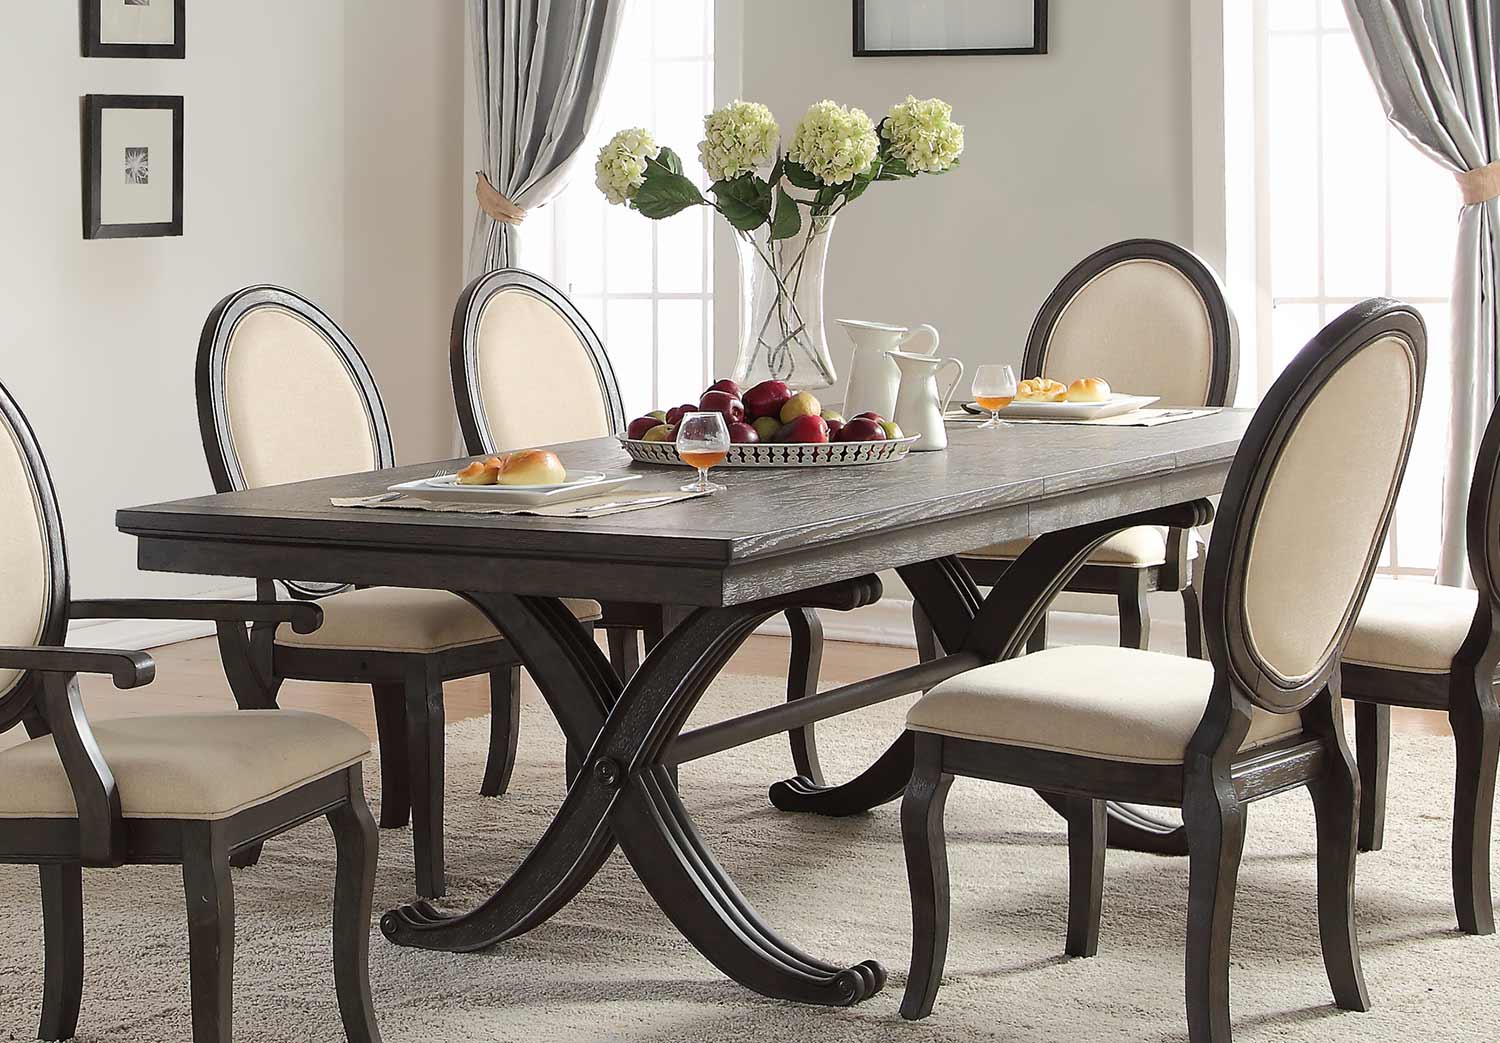 Homelegance Lindley Dining Table with Leaf - Walnut/Dusty Gray